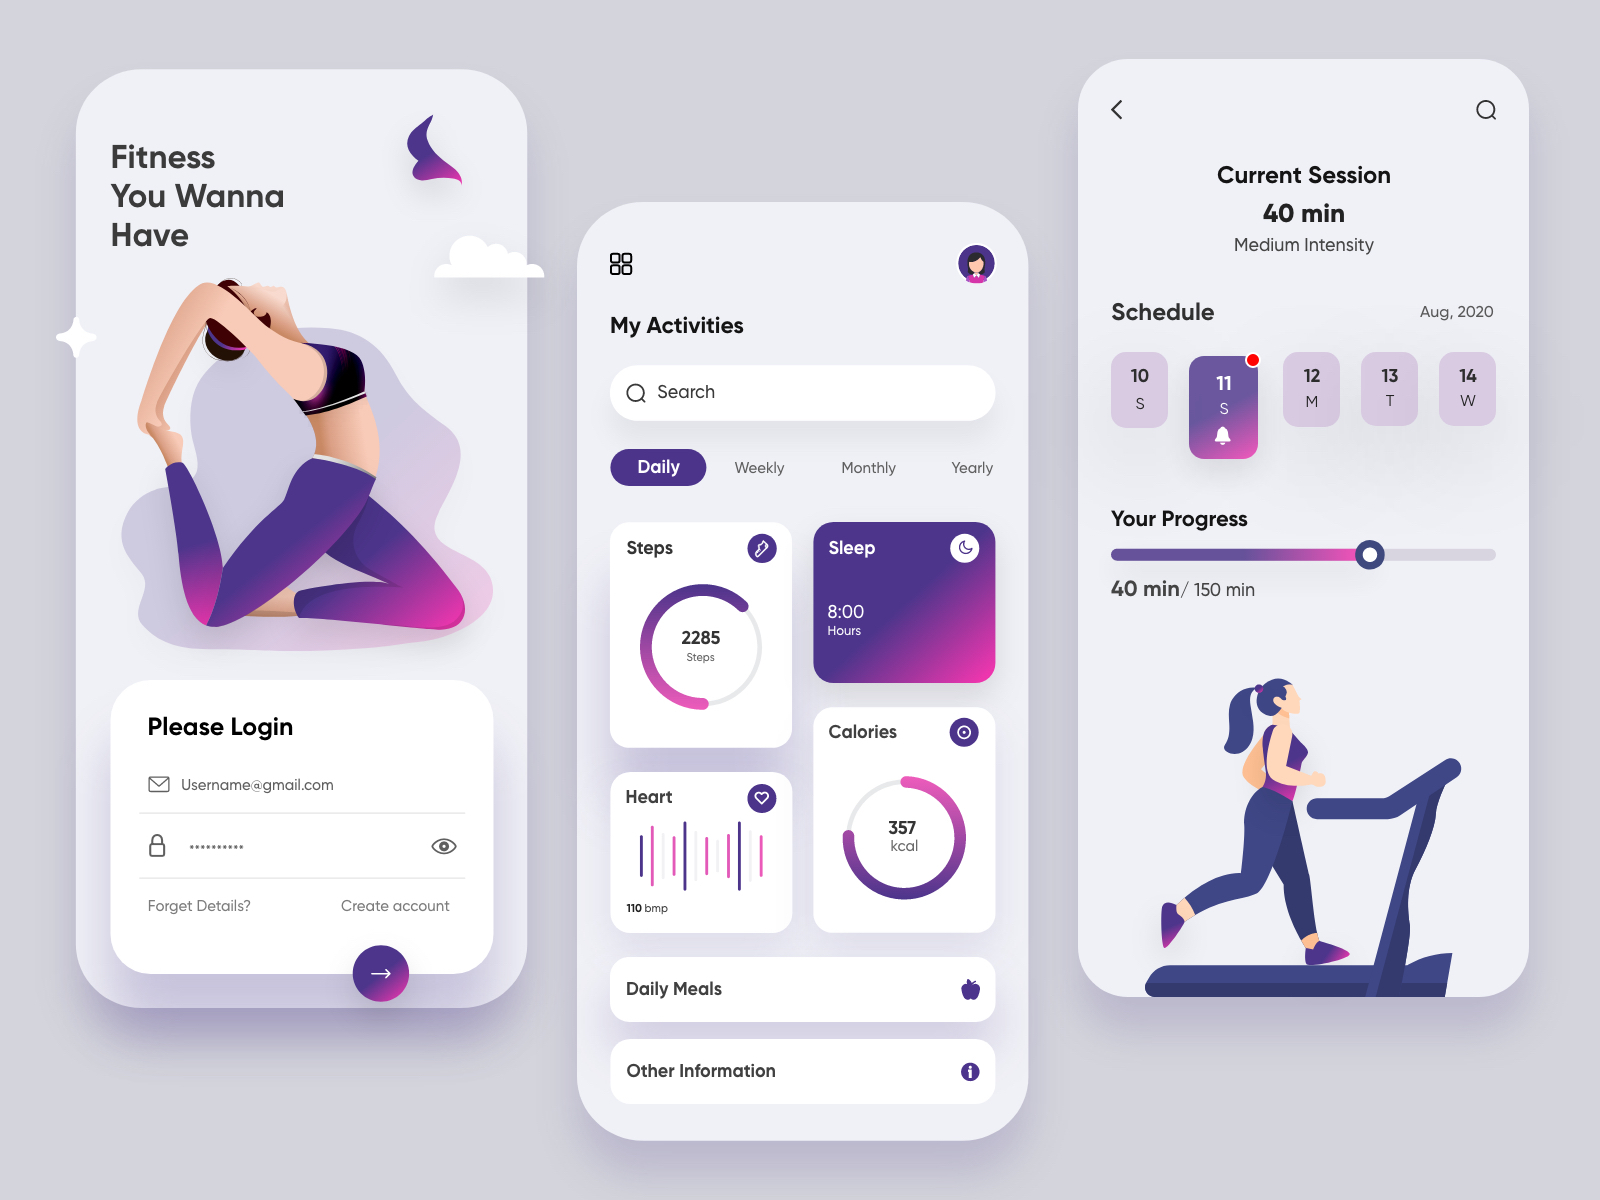 Fitness Mobile Application-UX/UI Design by Hira Riaz🔥 for Upnow Studio